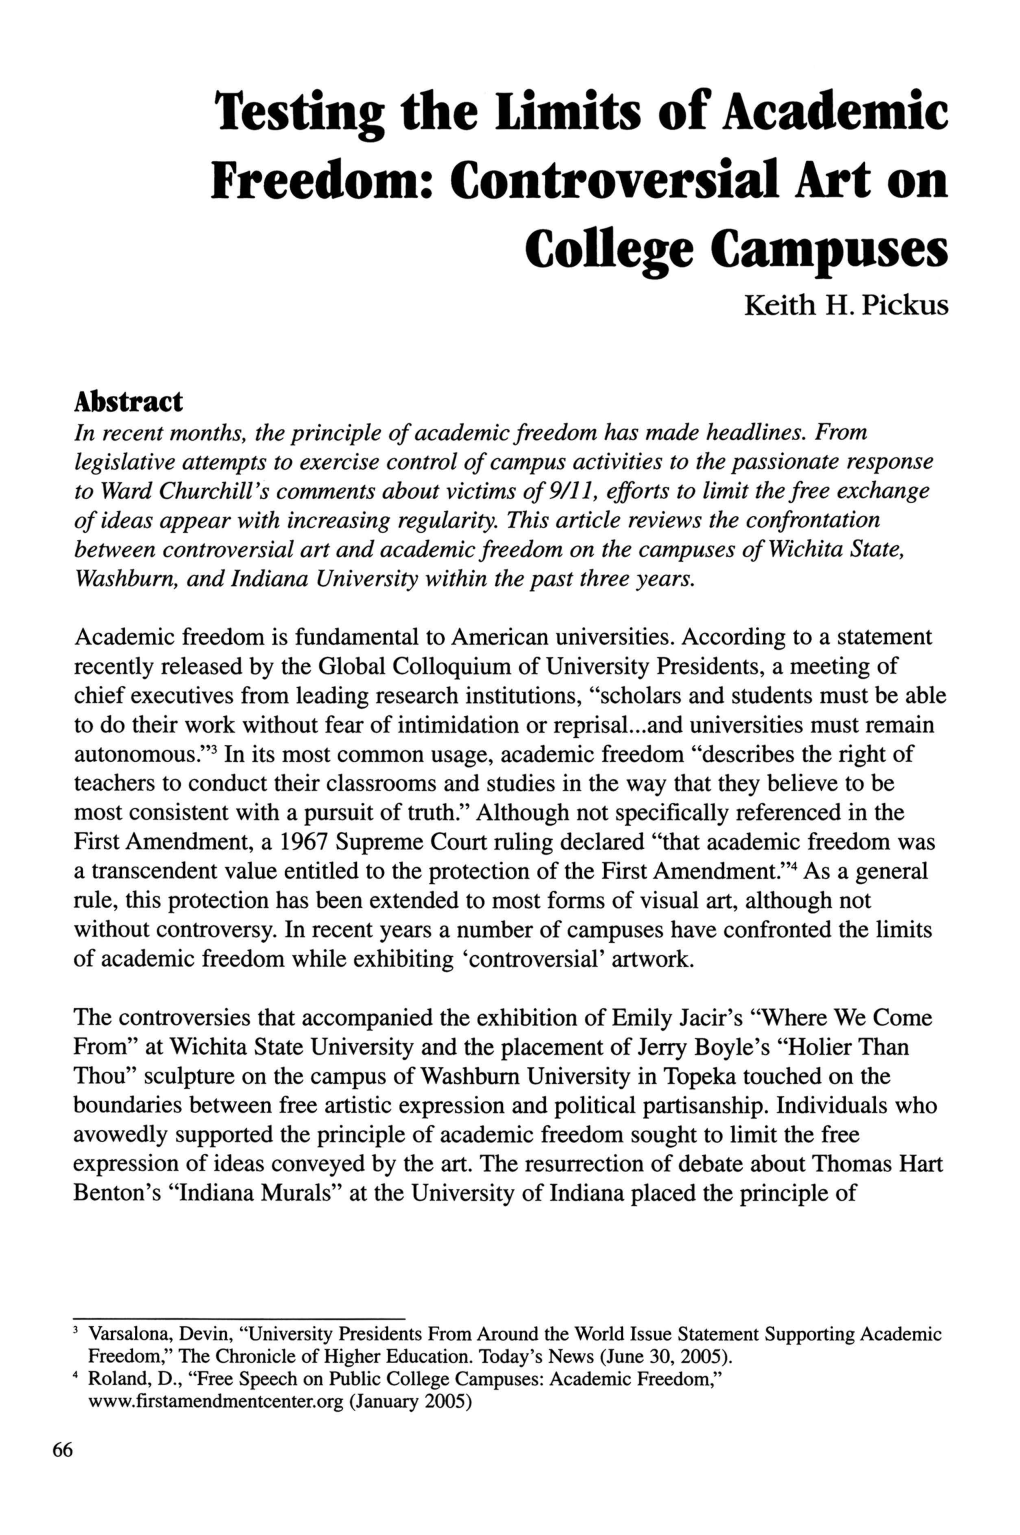 Testing the Limits of Academic Freedom: Controversial Art on College Campuses Keith H